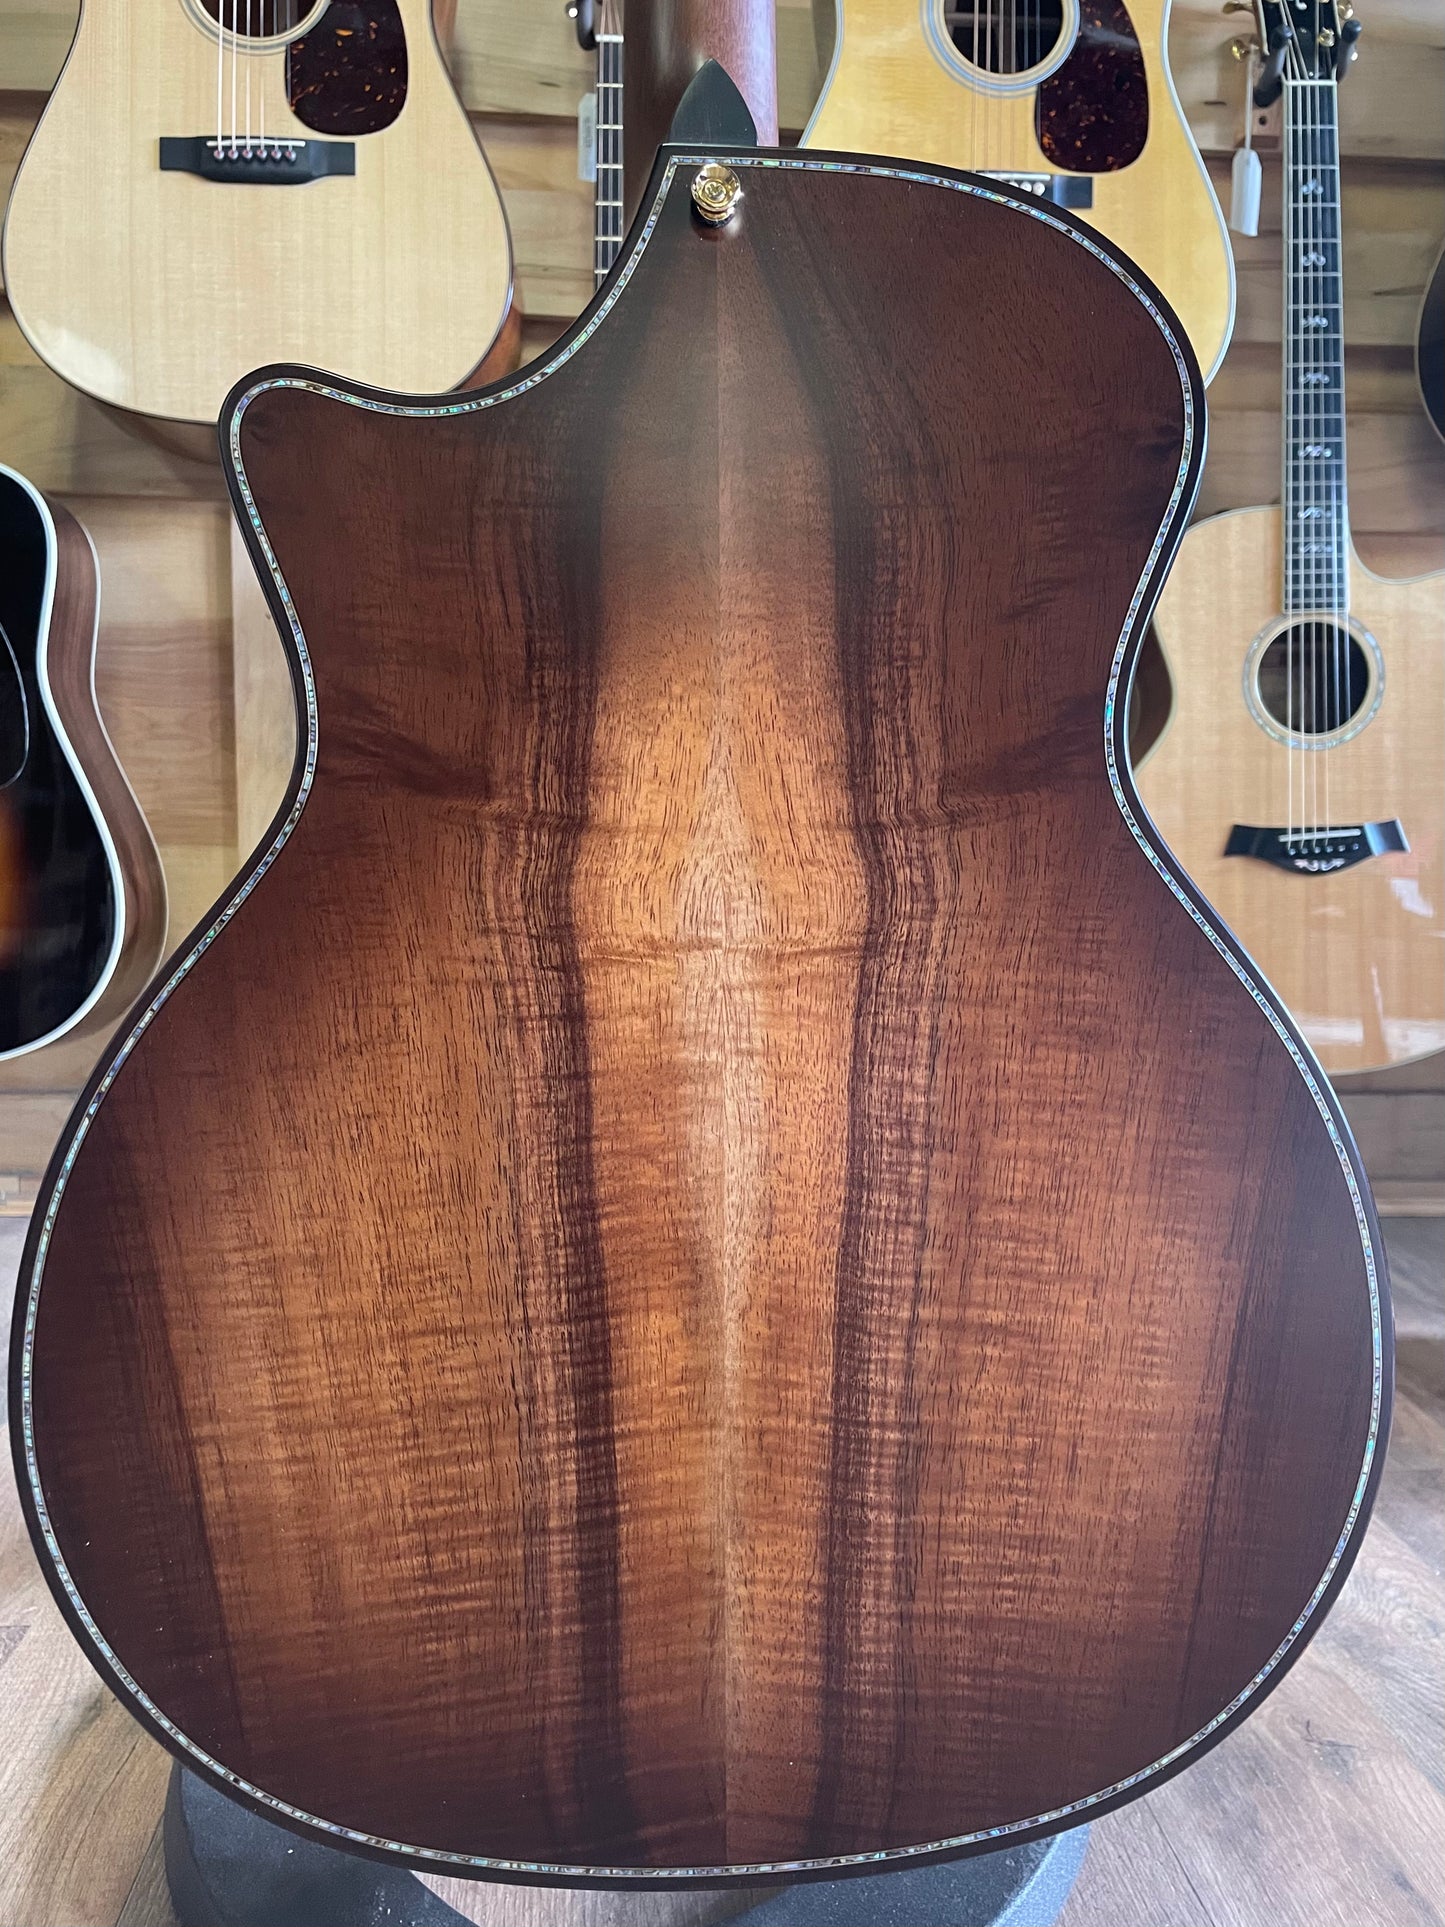 Taylor Builder's Edition K24ce (NEW)